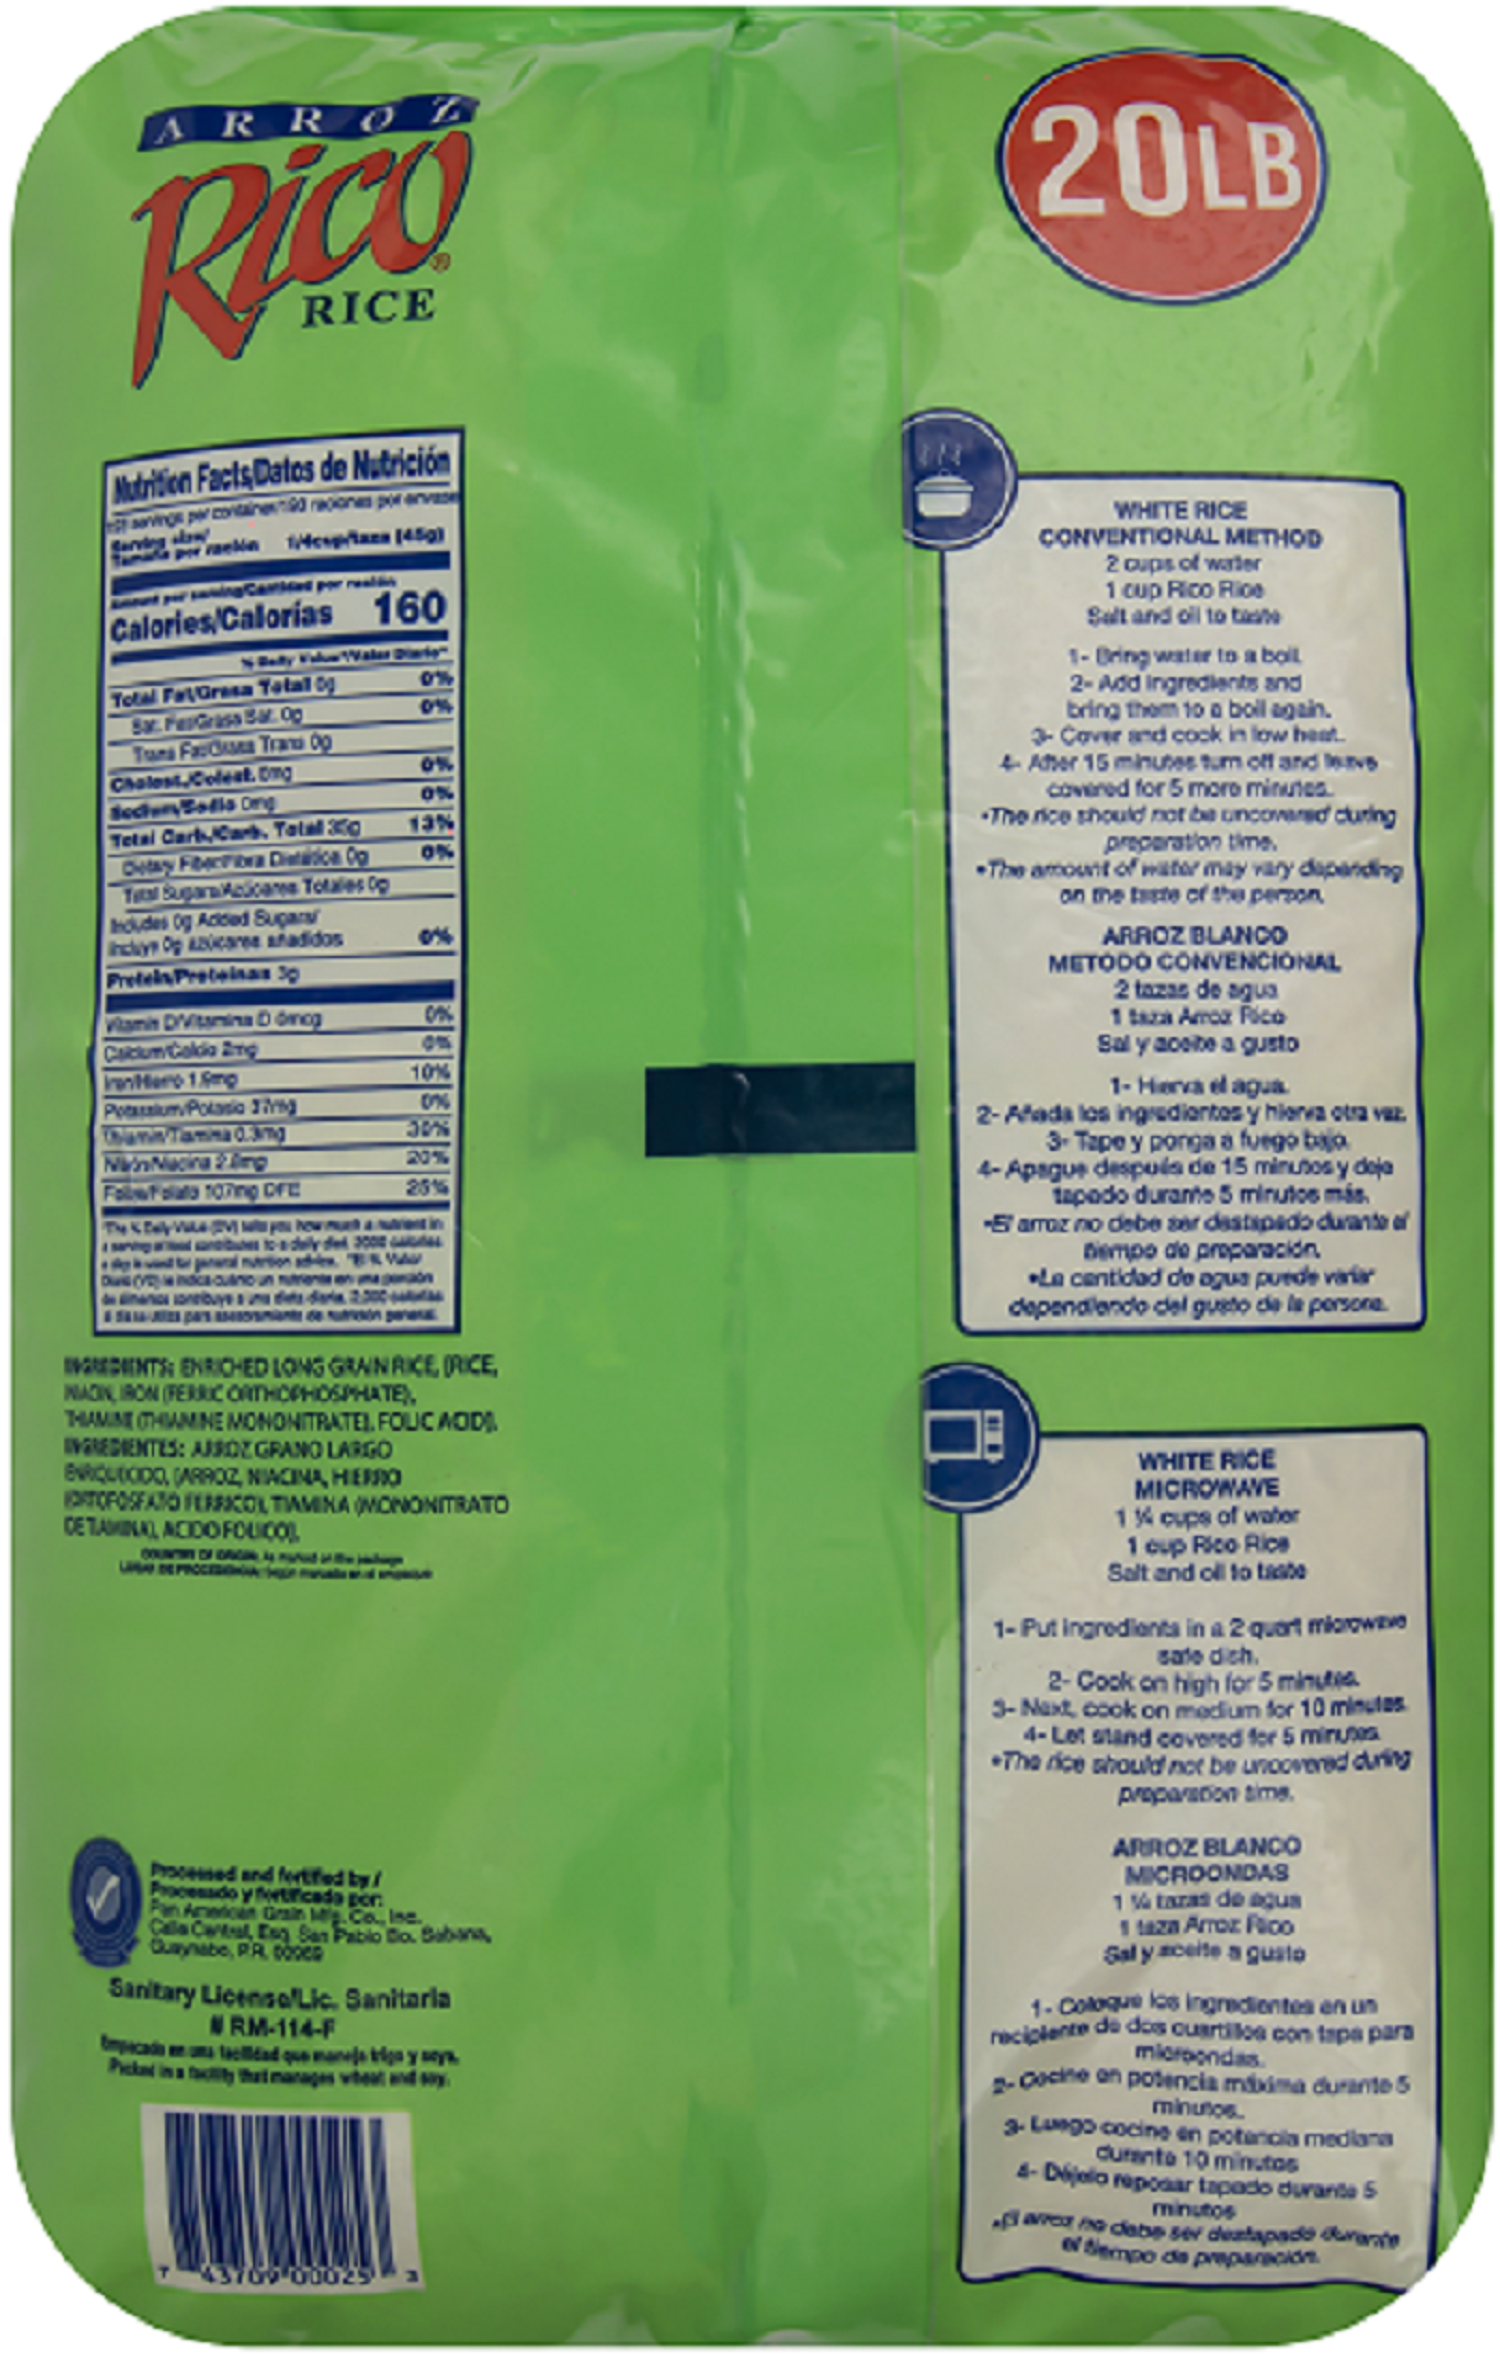 Rico Long Grain Rice, 20 lb Made in Puerto Rico Gluten Free - image 2 of 3